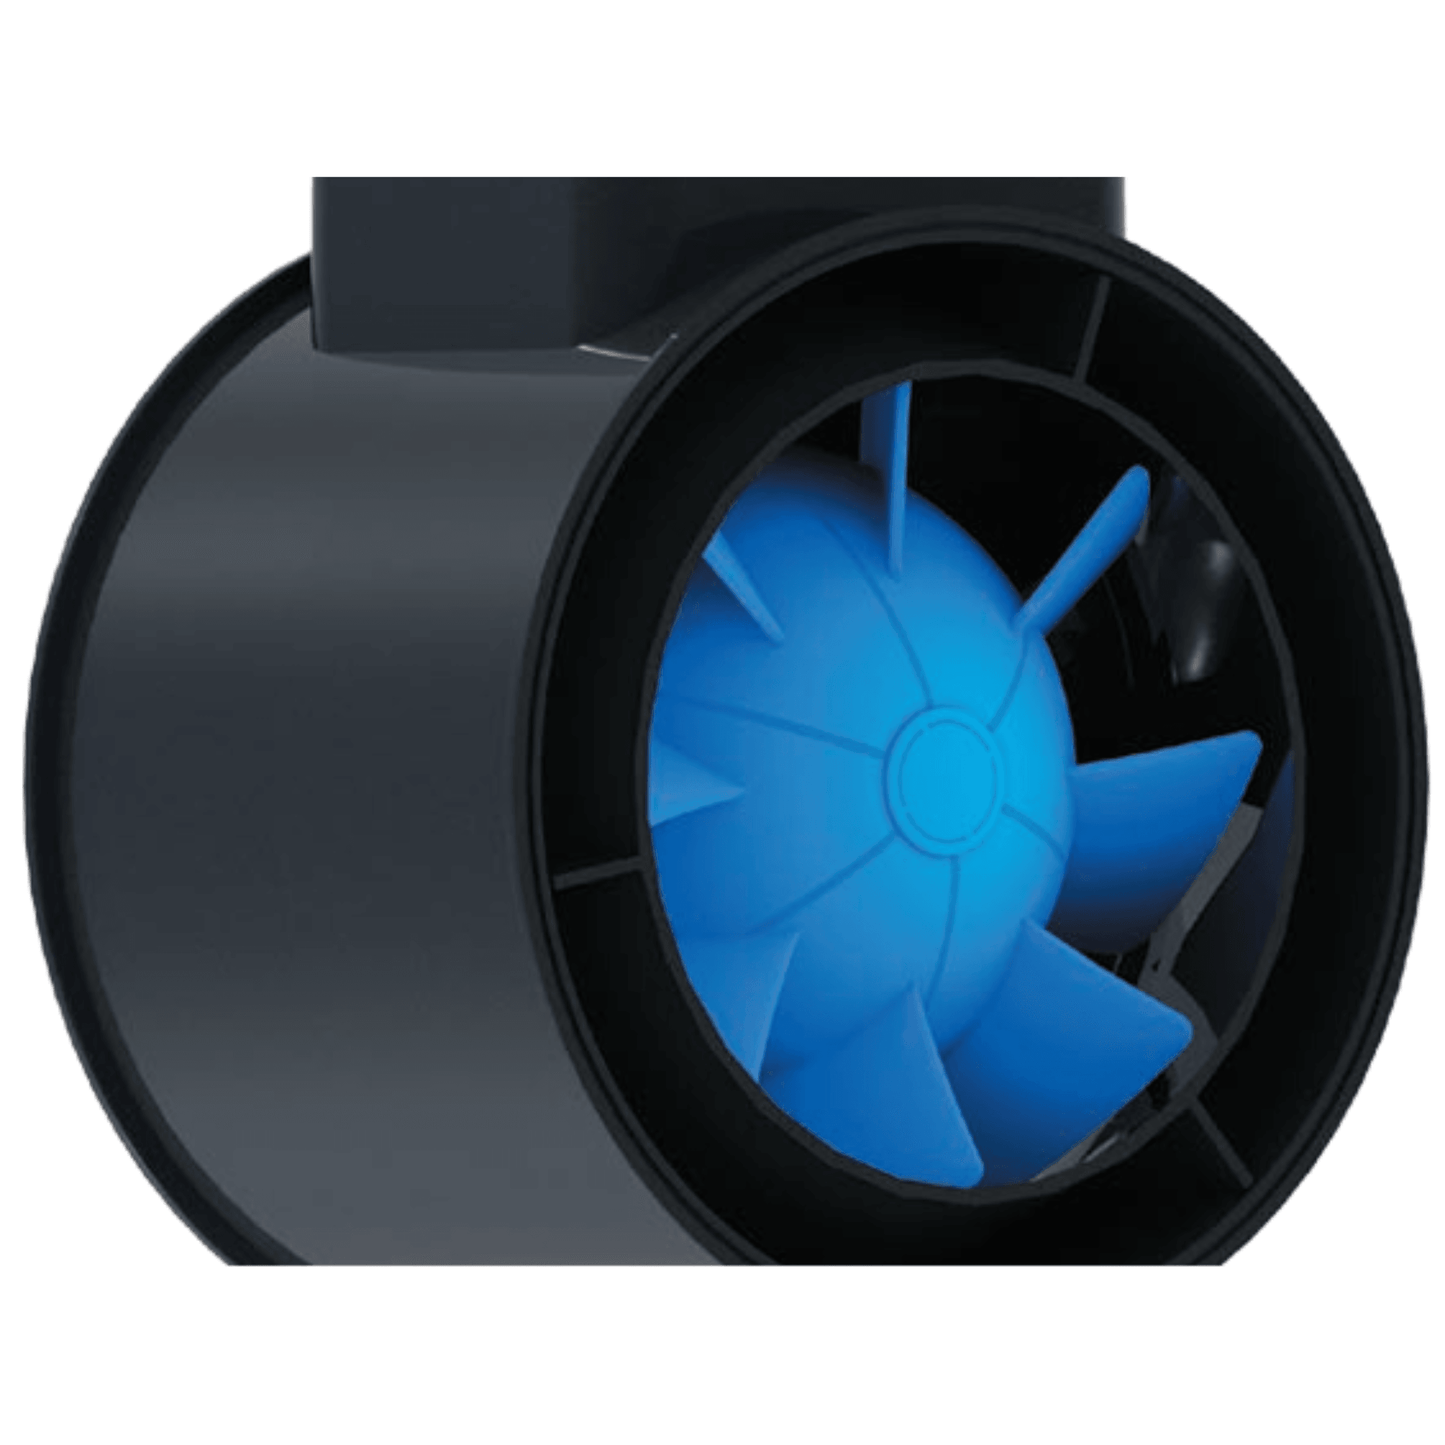 Vents Turbo Tube Pro Series Inline Fans